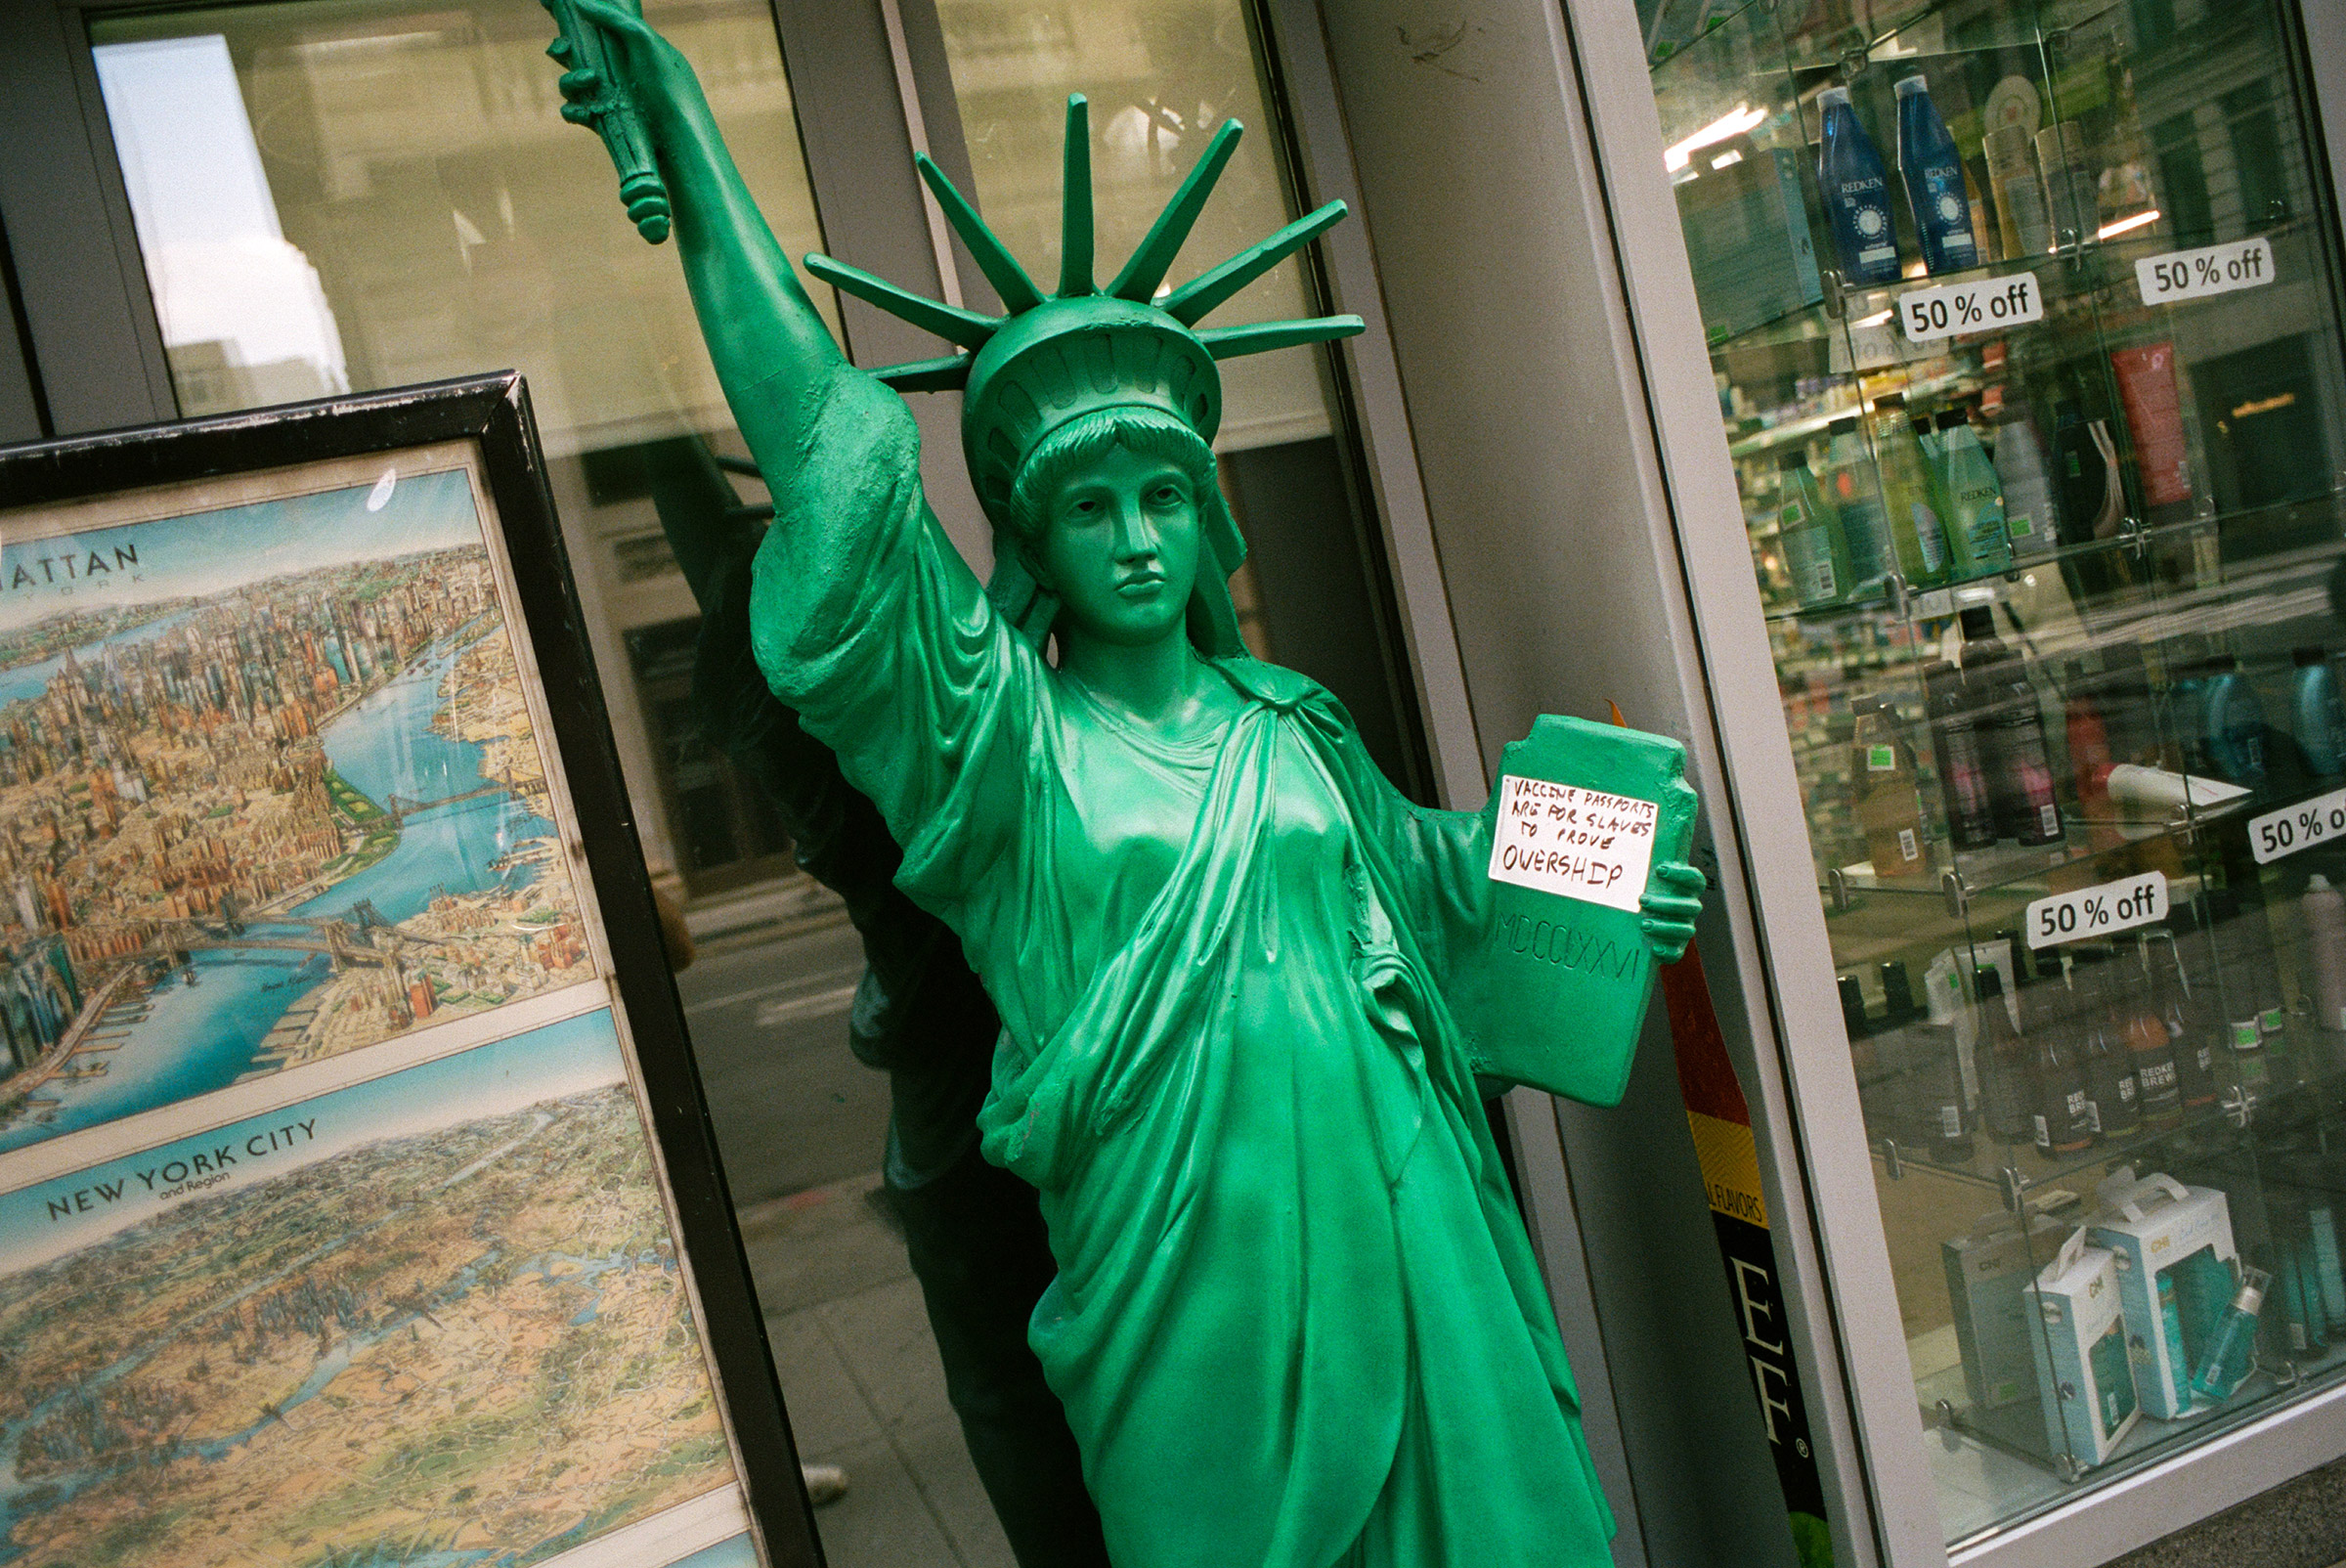 New York, NY - 8/26/21 - A prop Statue Of Liberty inadvertently advertises for anti-vax protestors who have updated the message on her tablet.